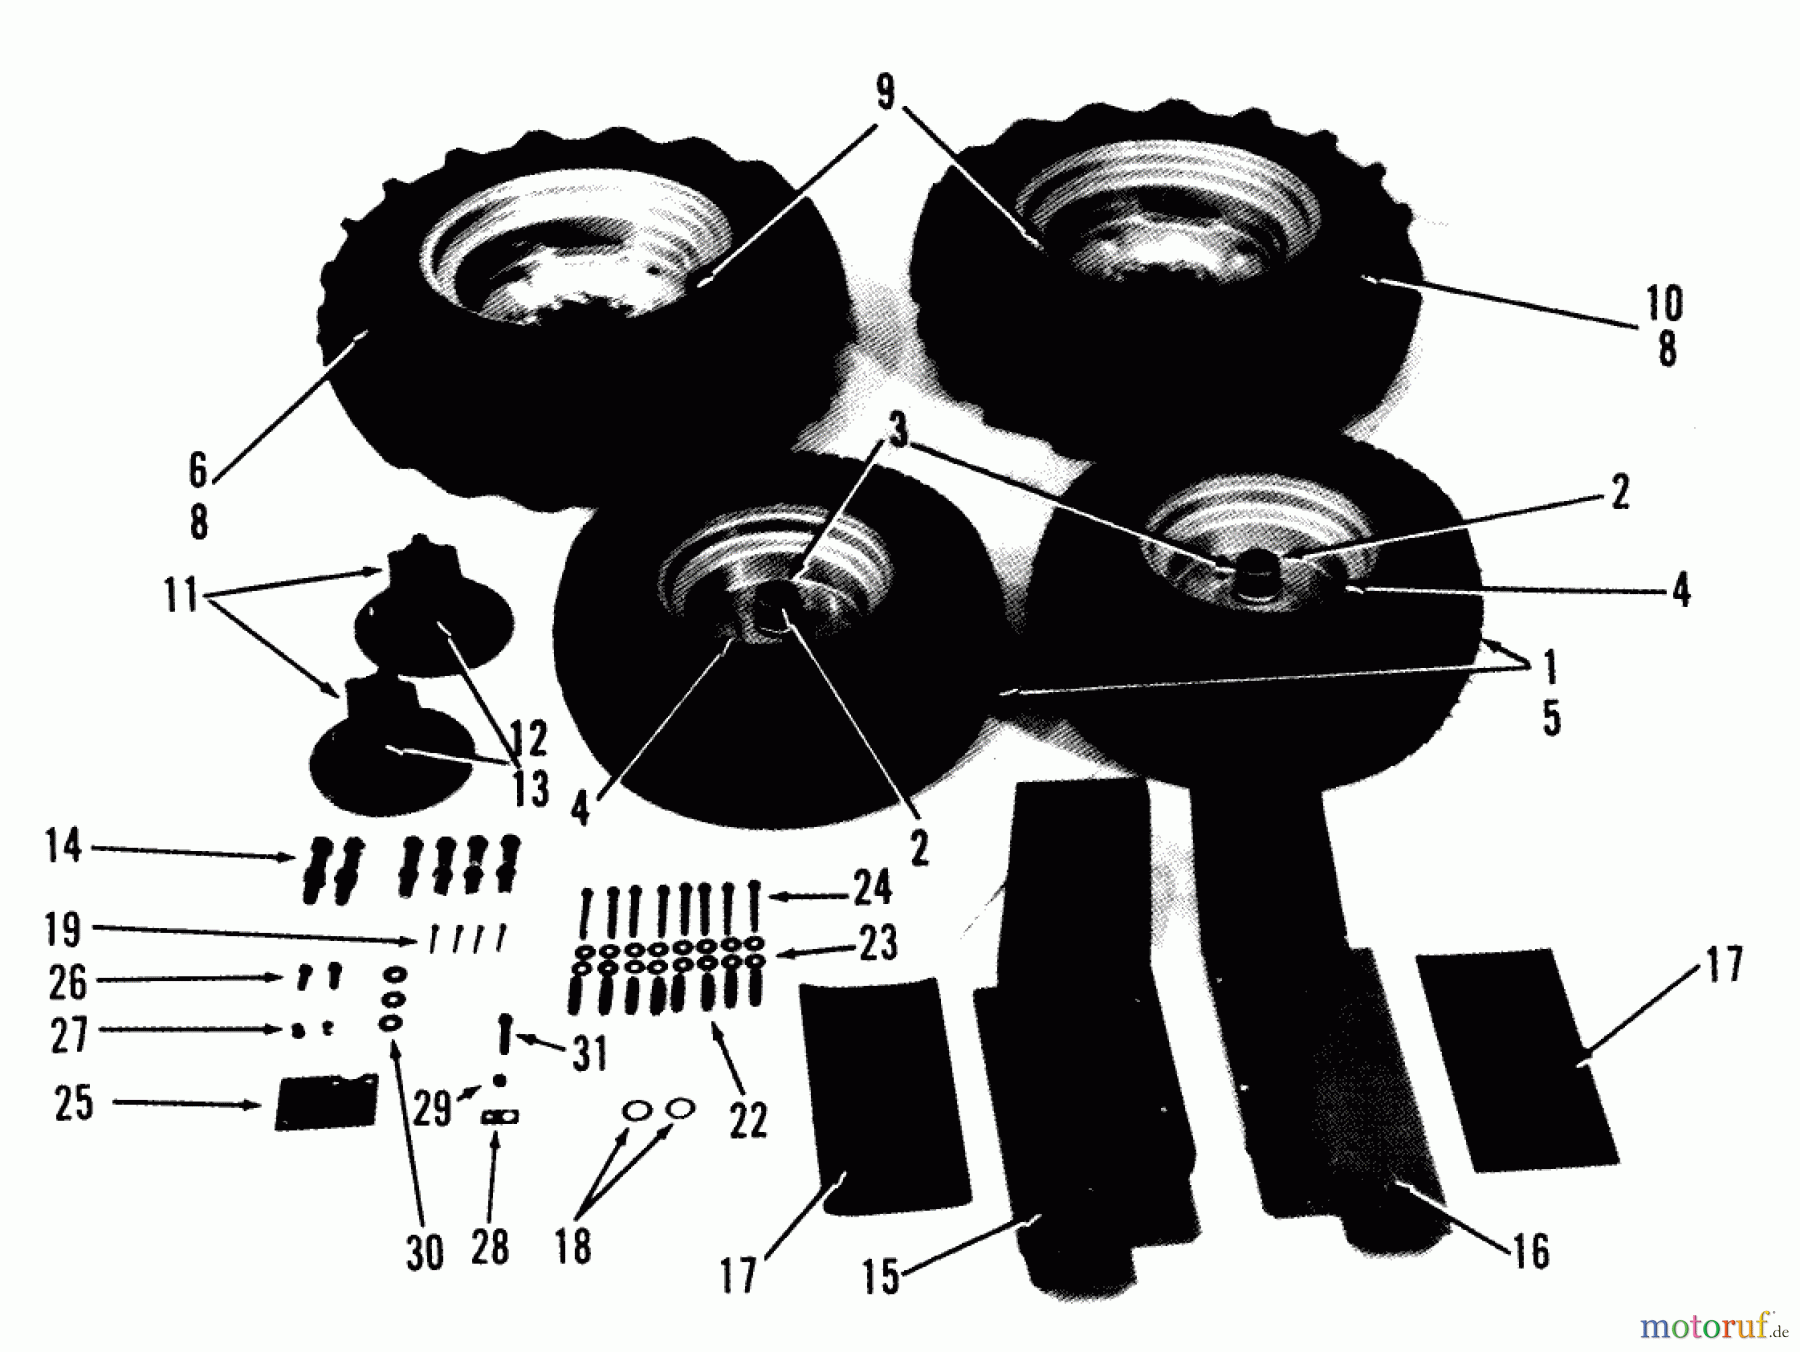  Toro Neu Accessories 82823 - Toro Tilling Kit, 1987 PARTS LIST FOR AG TRACTOR KIT FACTORY ORDER NO. 82823